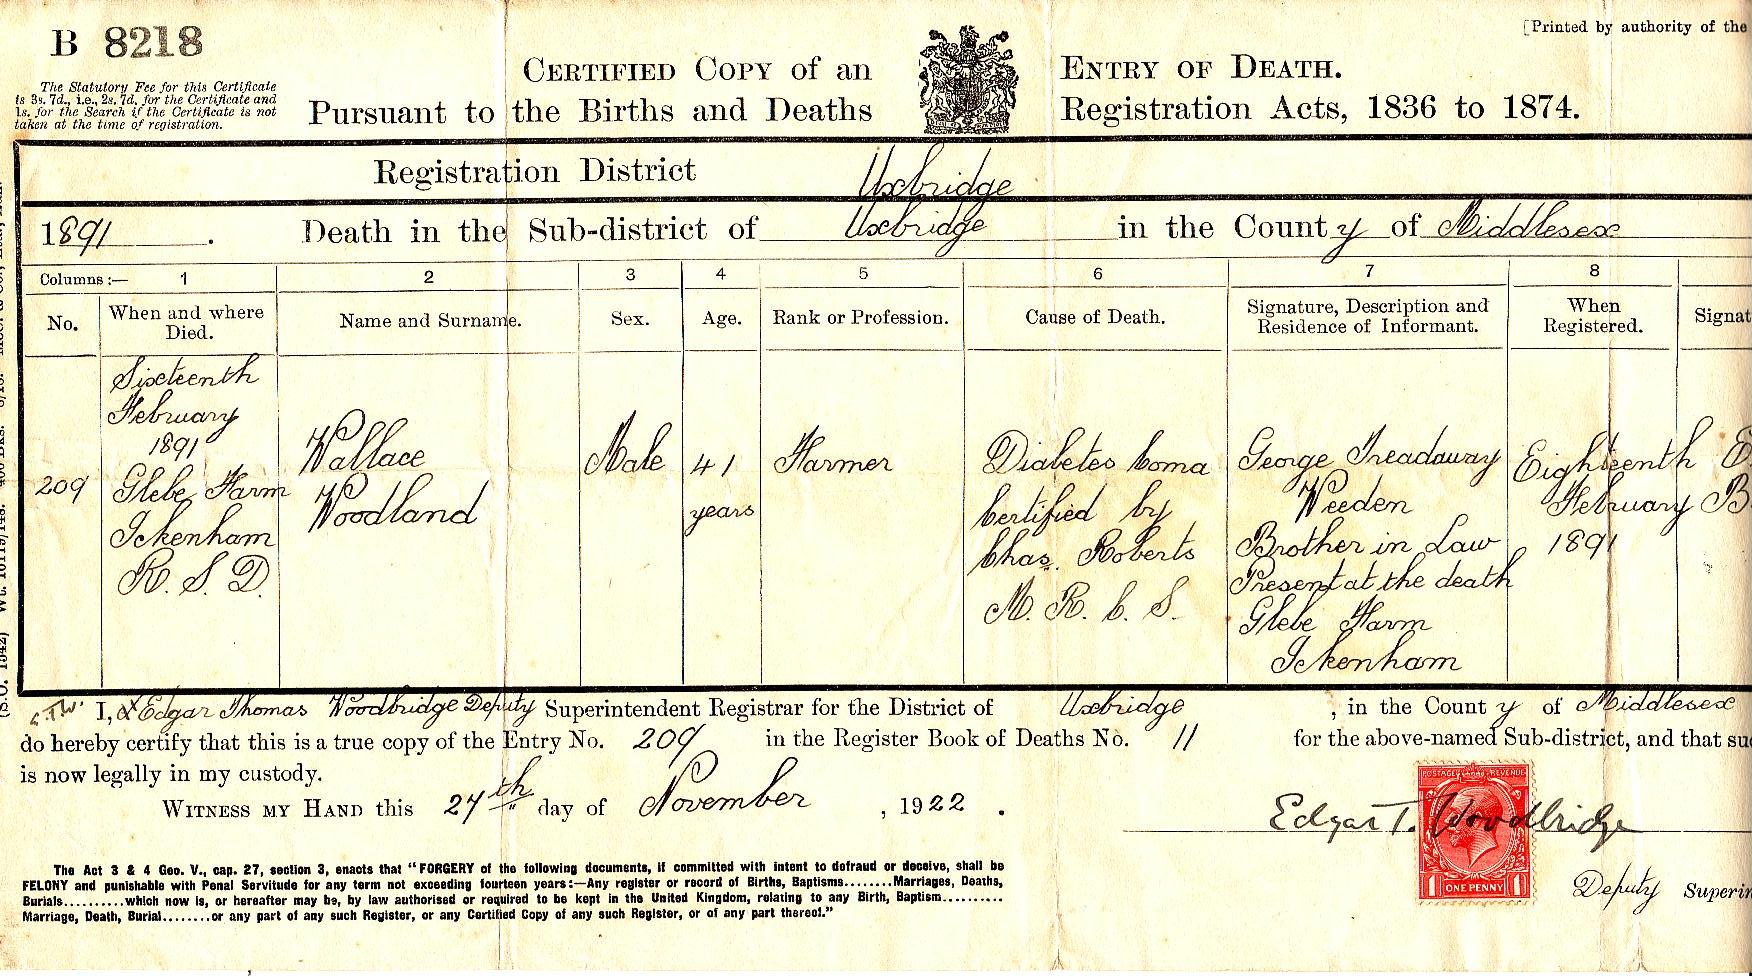 Death certificate for Wallace Woodland